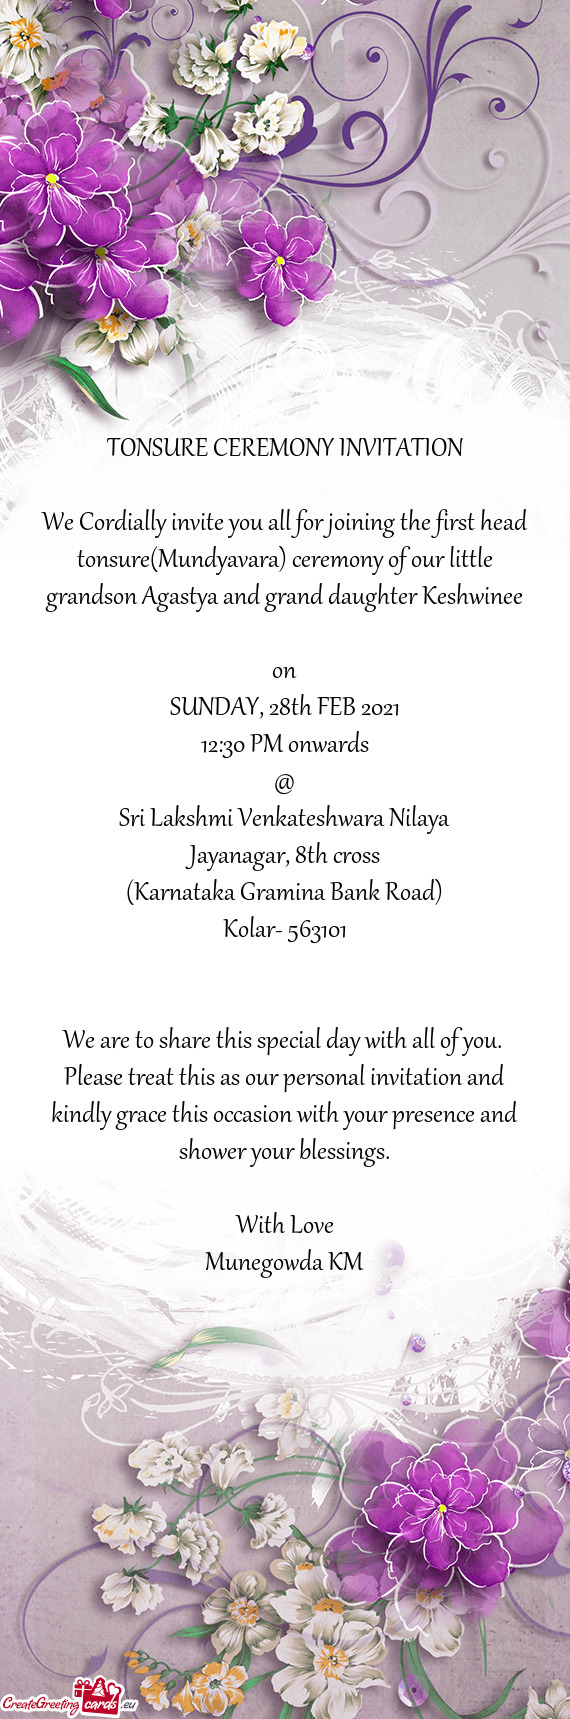 We Cordially invite you all for joining the first head tonsure(Mundyavara) ceremony of our little gr